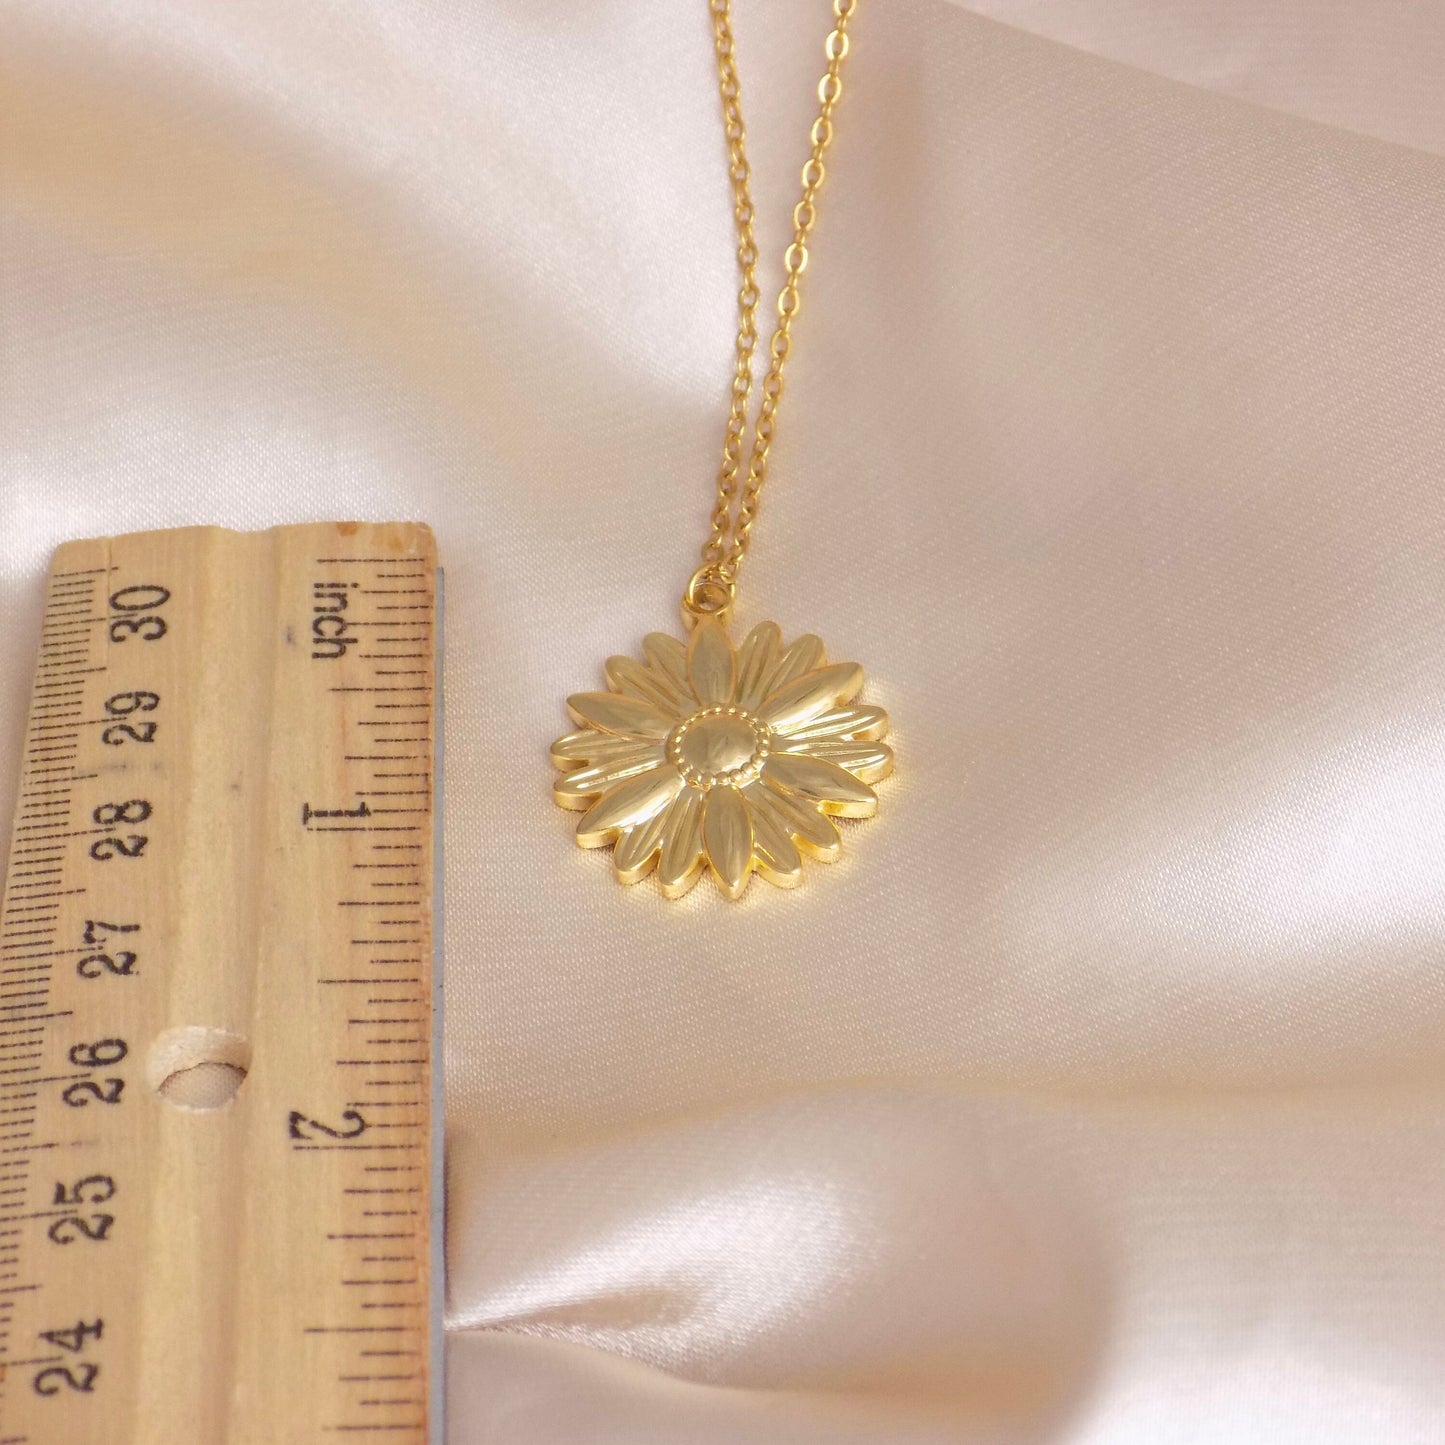 Gold Sunflower Necklace, 18K Gold Stainless Steel, Large Flower Charm For Her, M6-798